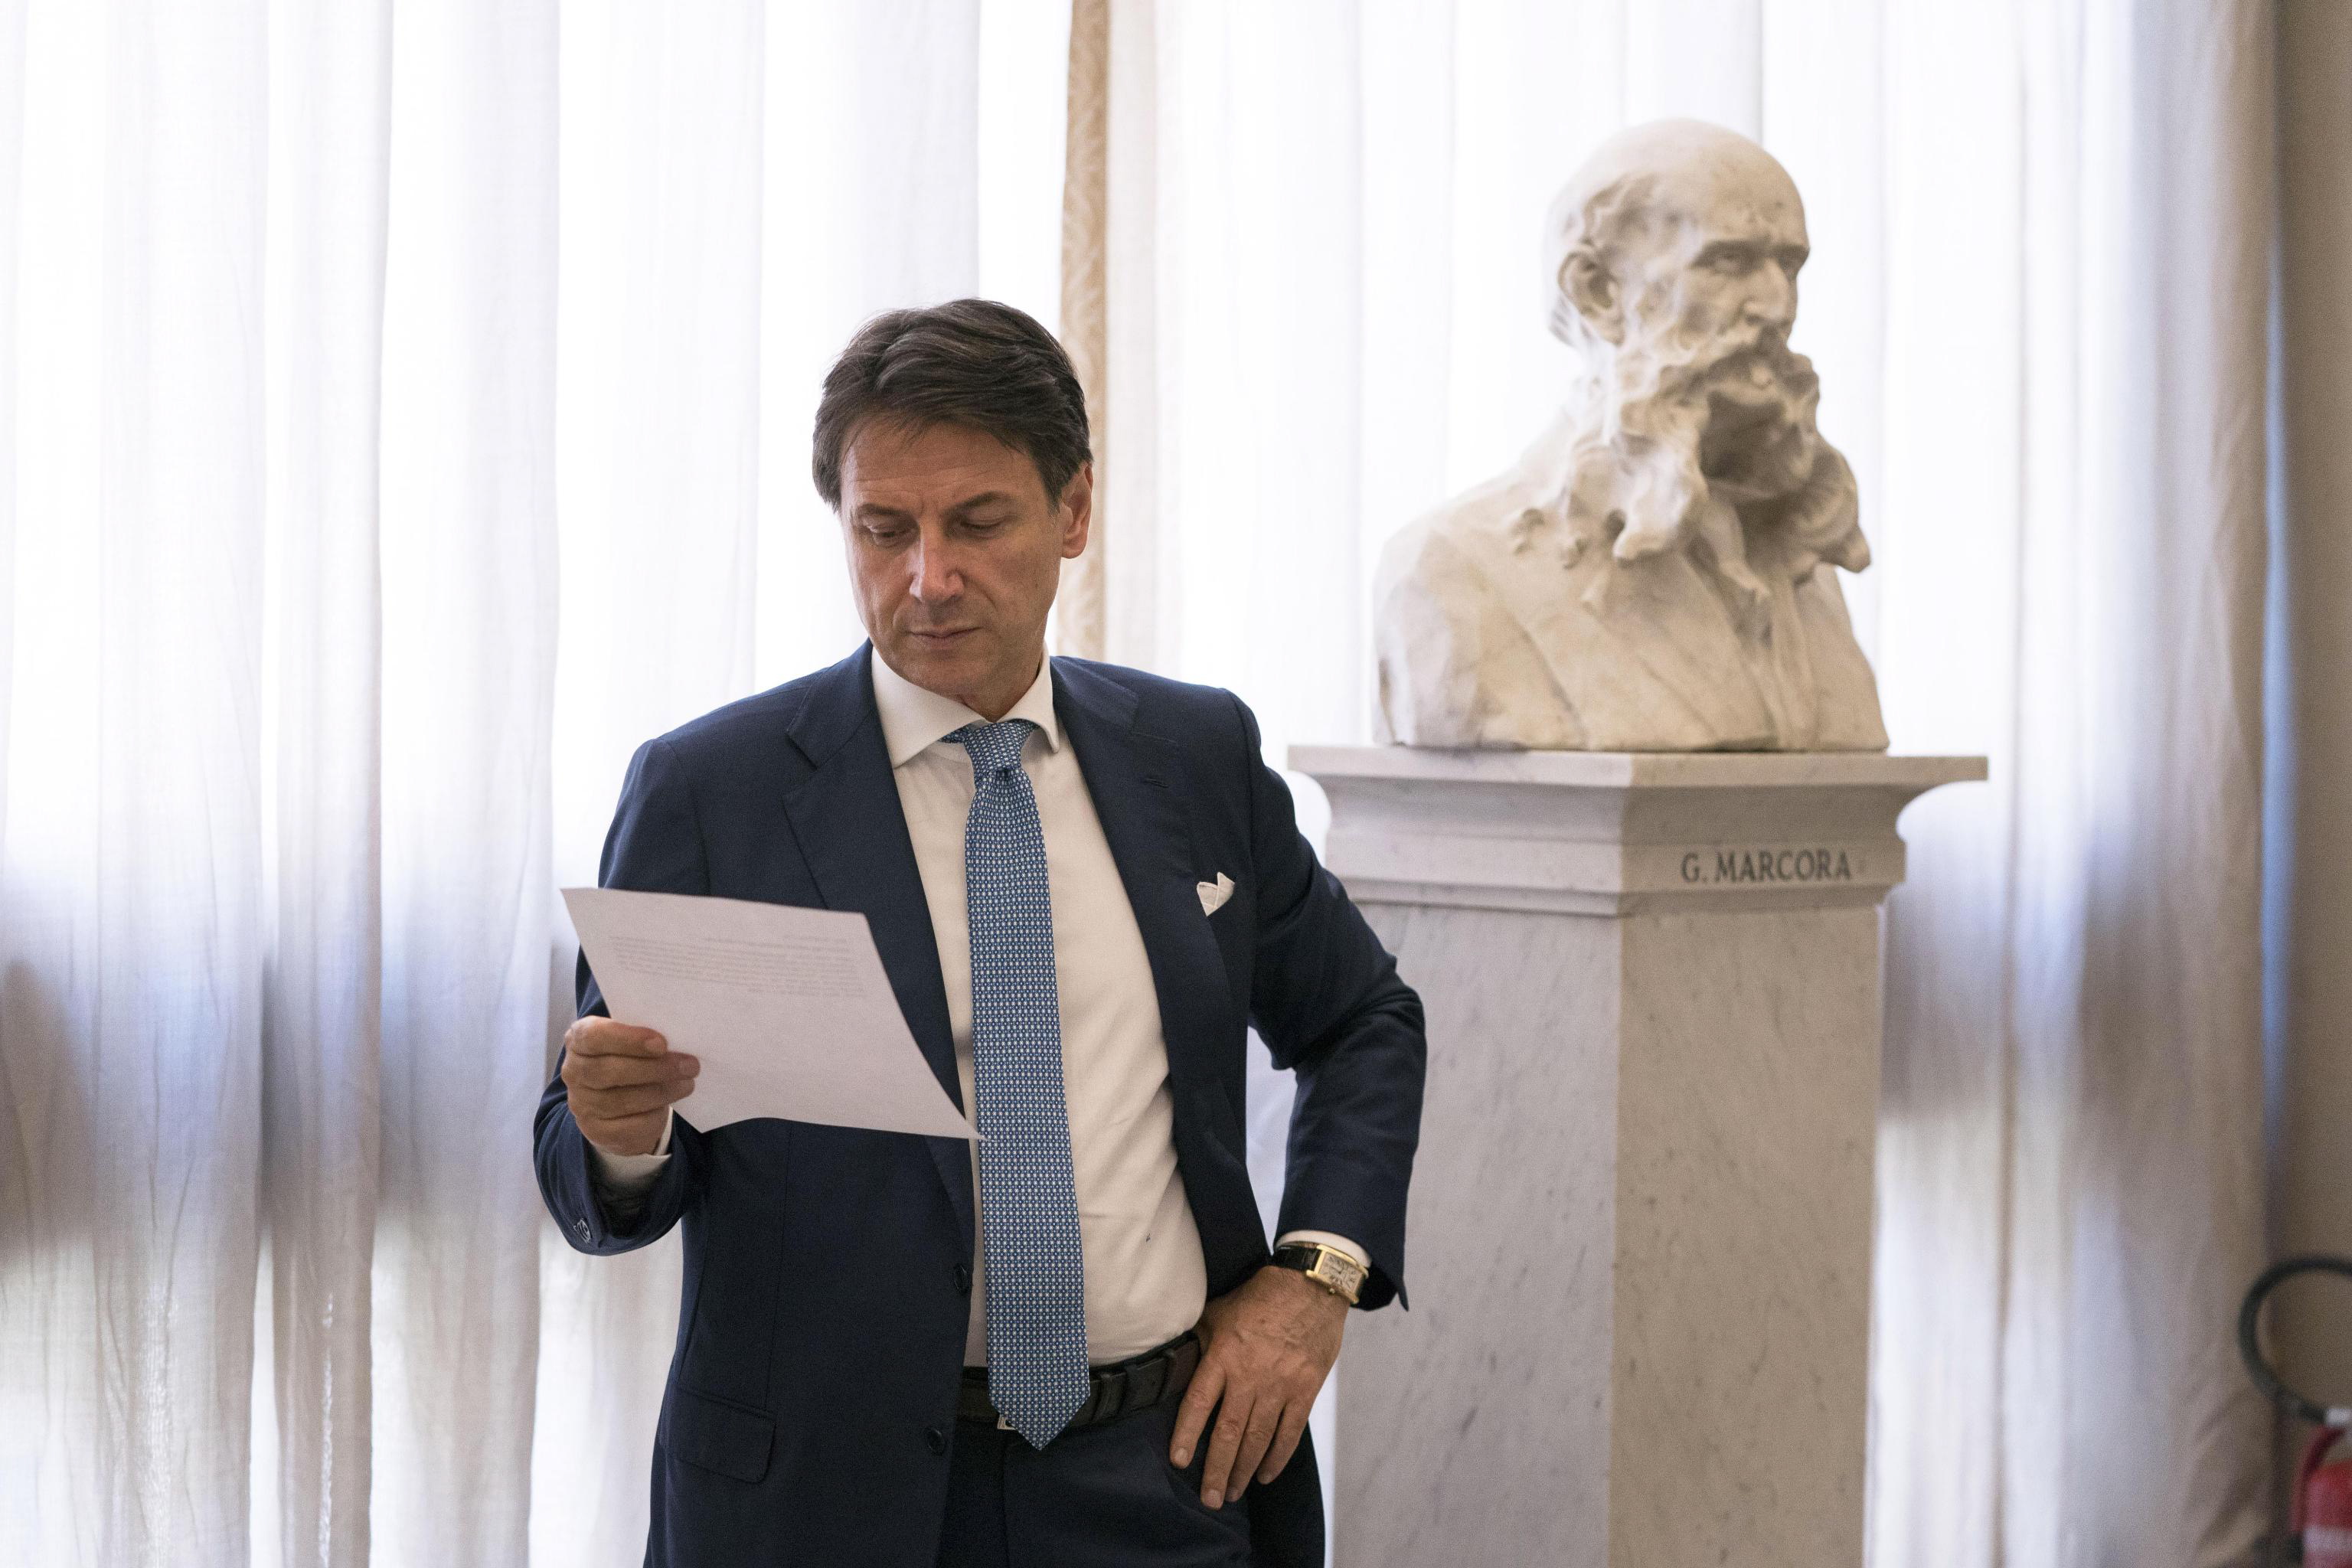 epa07803926 A handout photo made available by Chigi Palace press office shows Designated Italian Prime Minister Giuseppe Conte during a pause of a round of consultations for the formation of the new Government, Rome, Italy, 30 August 2019.  Italian President Mattarella on 29 August handed outgoing Premier Giuseppe Conte a mandate to form a government.  EPA/FILIPPO ATTILI / CHIGI PALACE PRESS OFFICE / HANDOUT  HANDOUT EDITORIAL USE ONLY/NO SALES